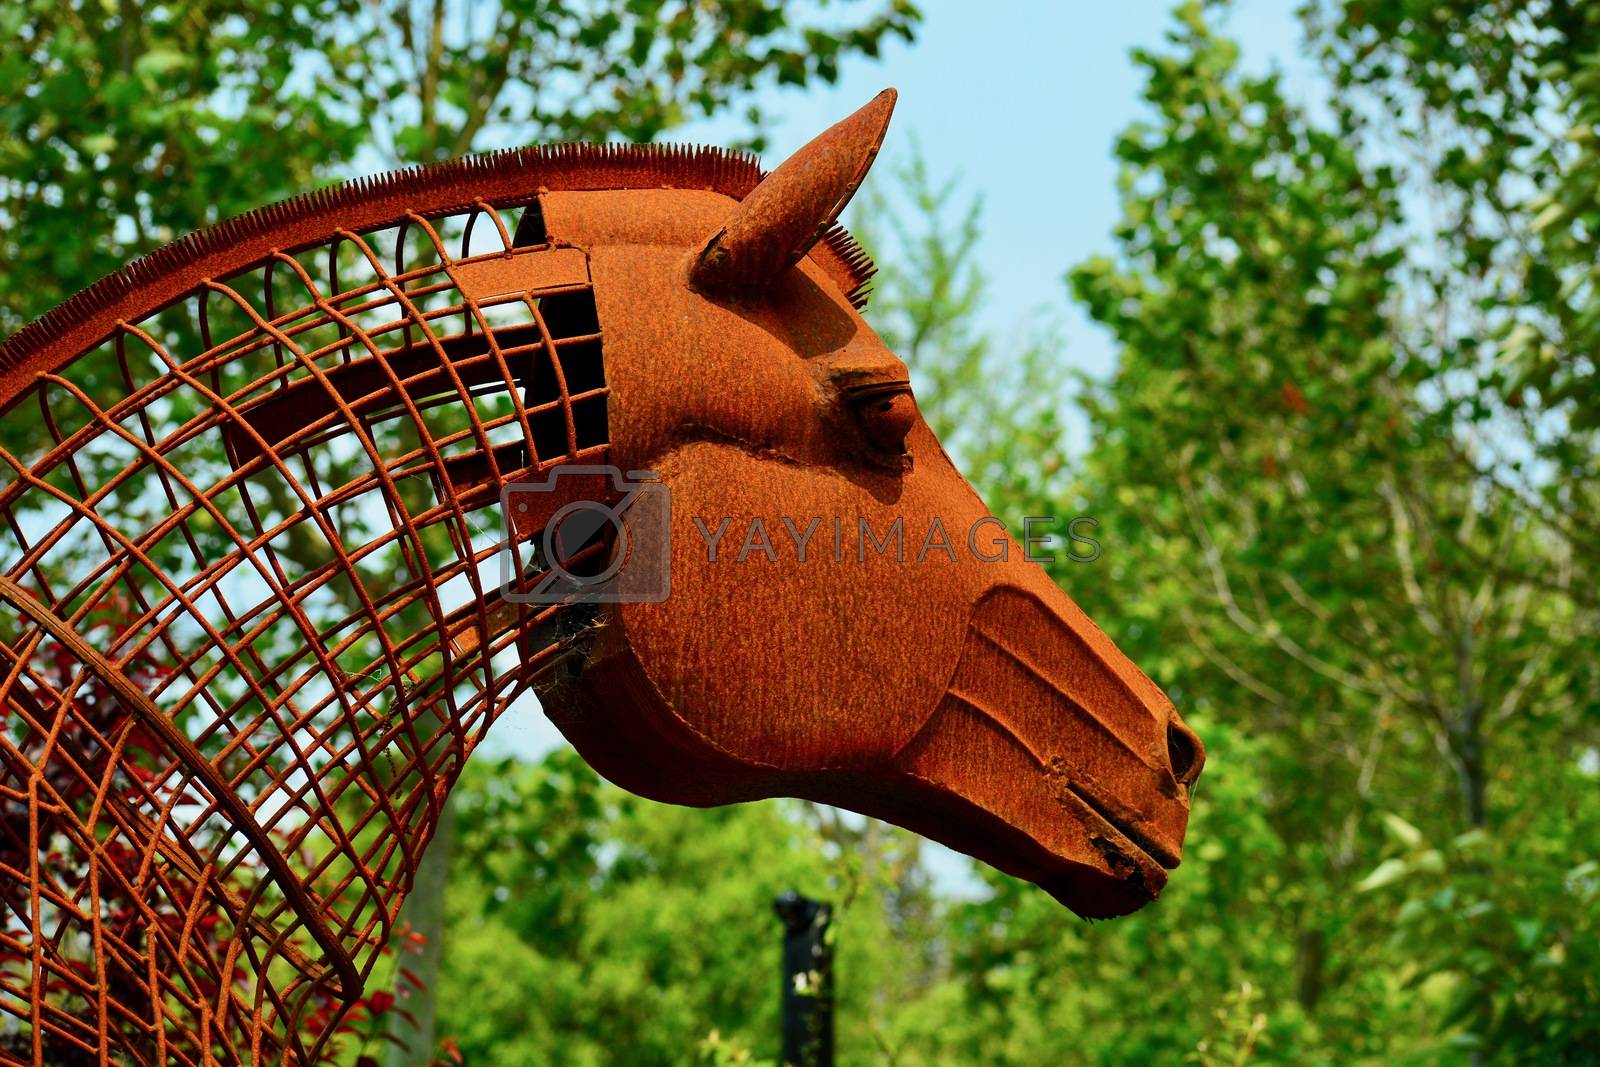 Royalty free image of Matakana, New Zealand - Dec 2019: Sculptureum sculpture park. Peculiar modern sculpture made of rusty wire and some metal parts, representing a horse. by Marshalkina